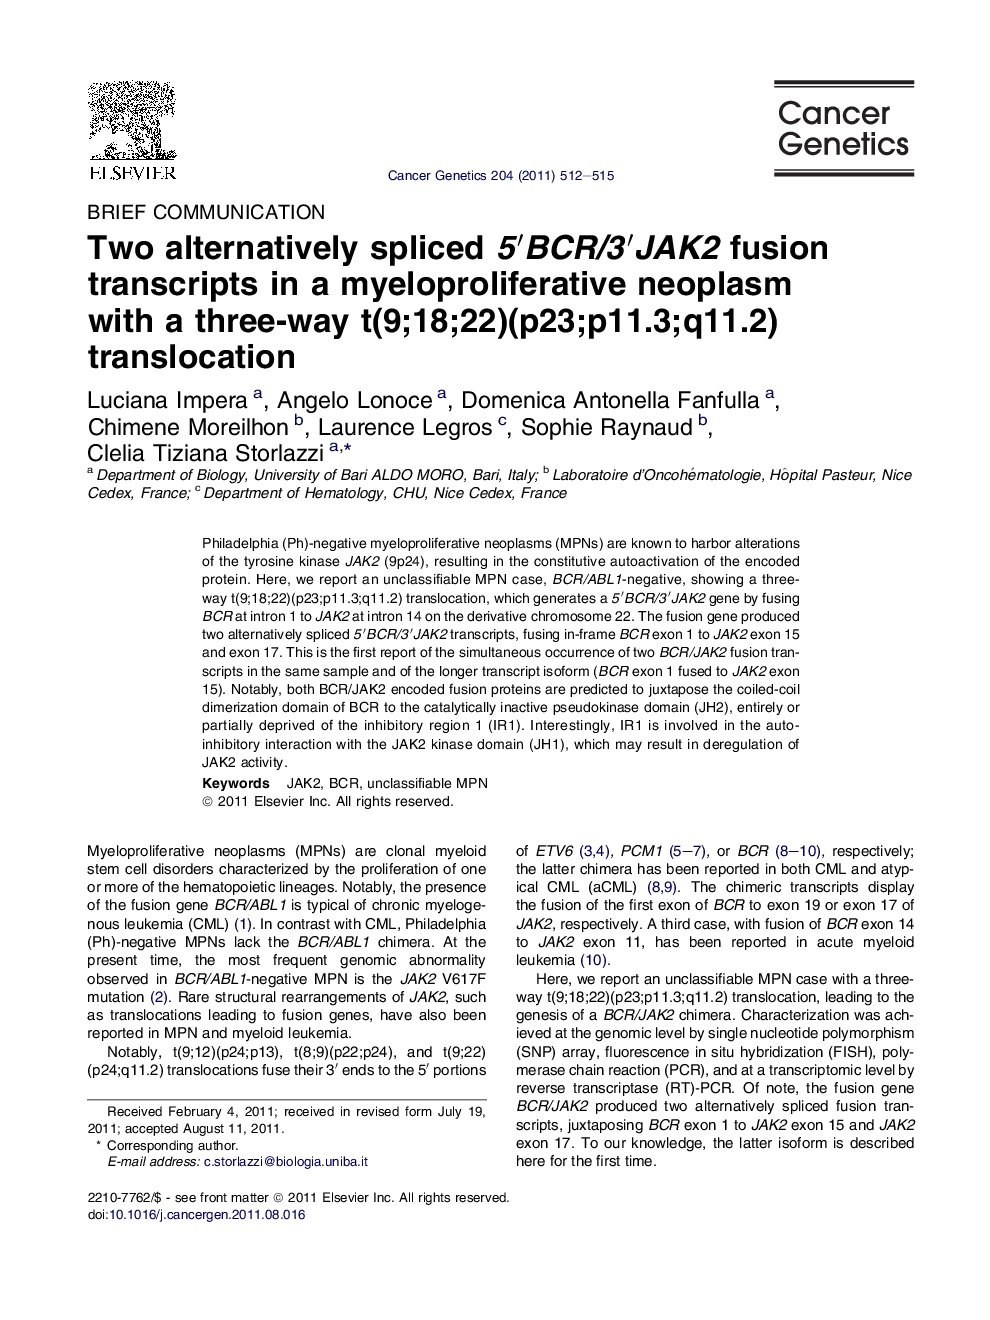 Two alternatively spliced 5′BCR/3′JAK2 fusion transcripts in a myeloproliferative neoplasm with a three-way t(9;18;22)(p23;p11.3;q11.2) translocation